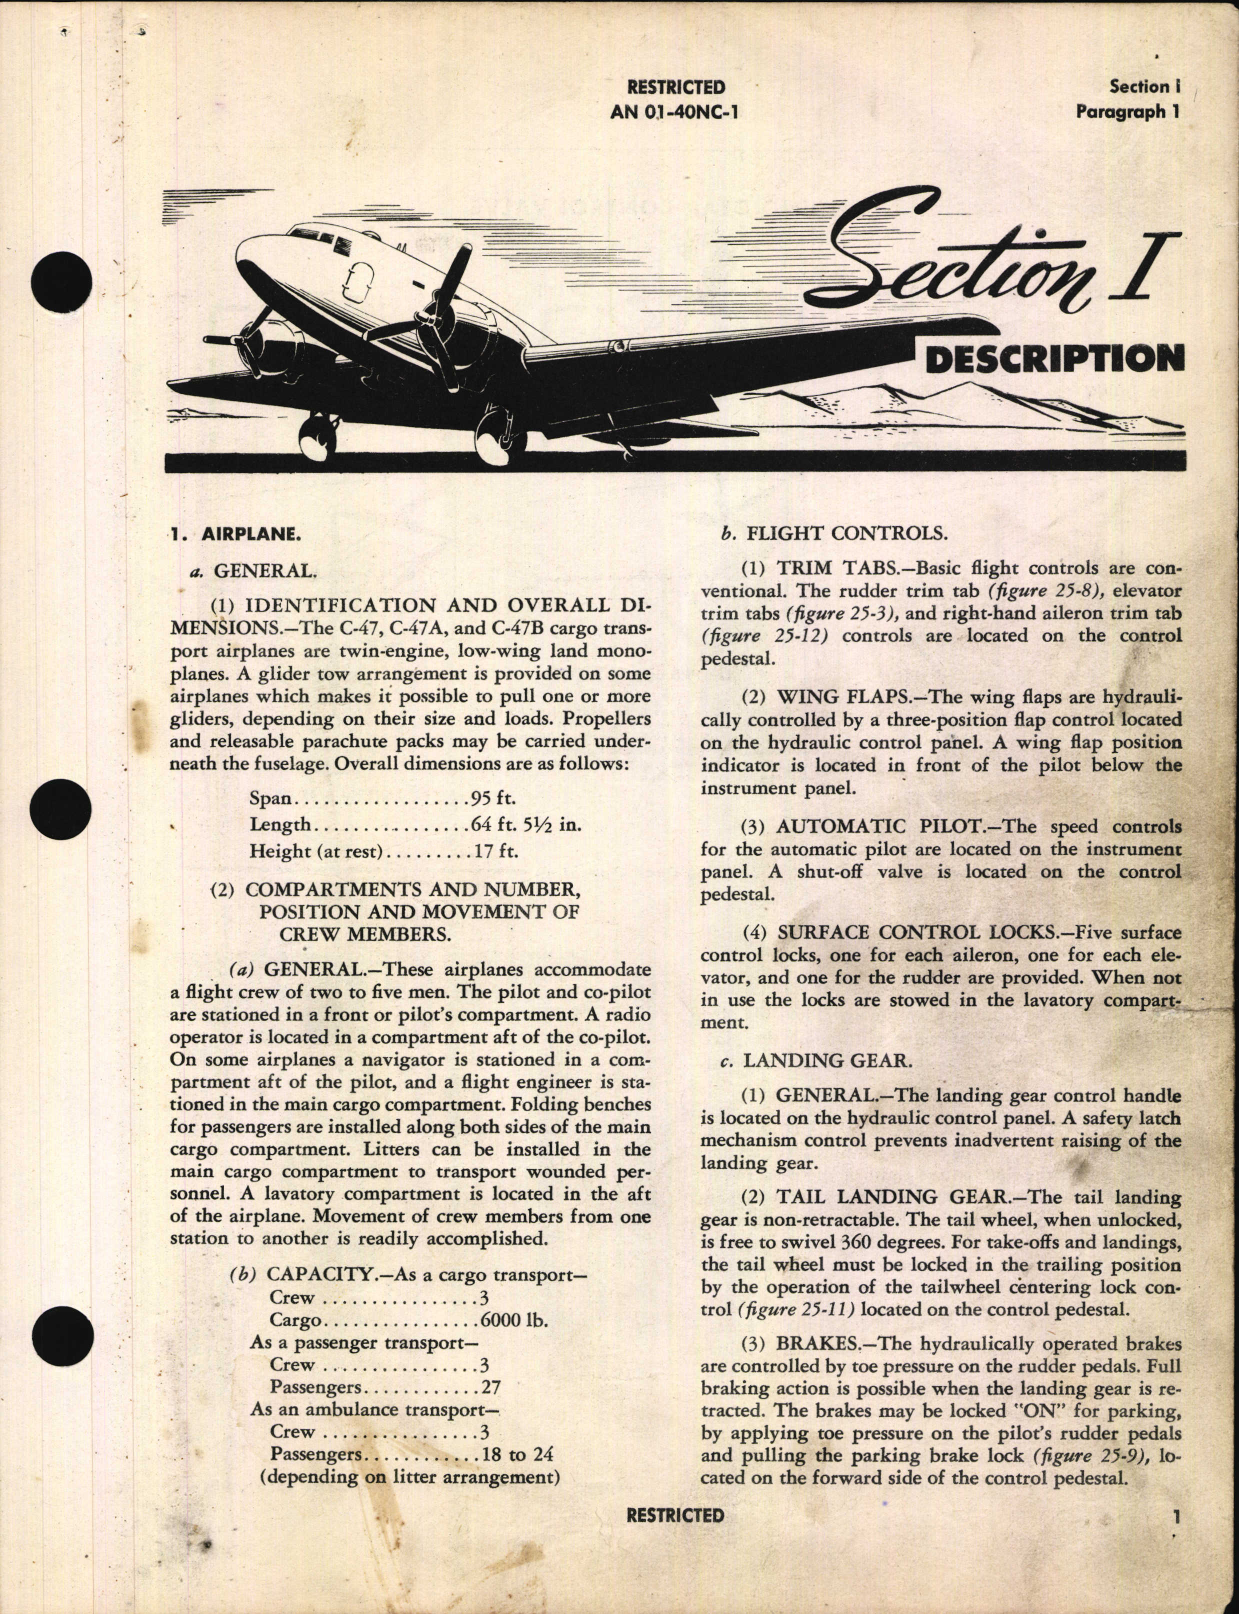 Sample page 5 from AirCorps Library document: Pilot's Flight Operating Instructions for C-47, C-47A, C-47B, R4D-1, R4D-5, and R4D-6